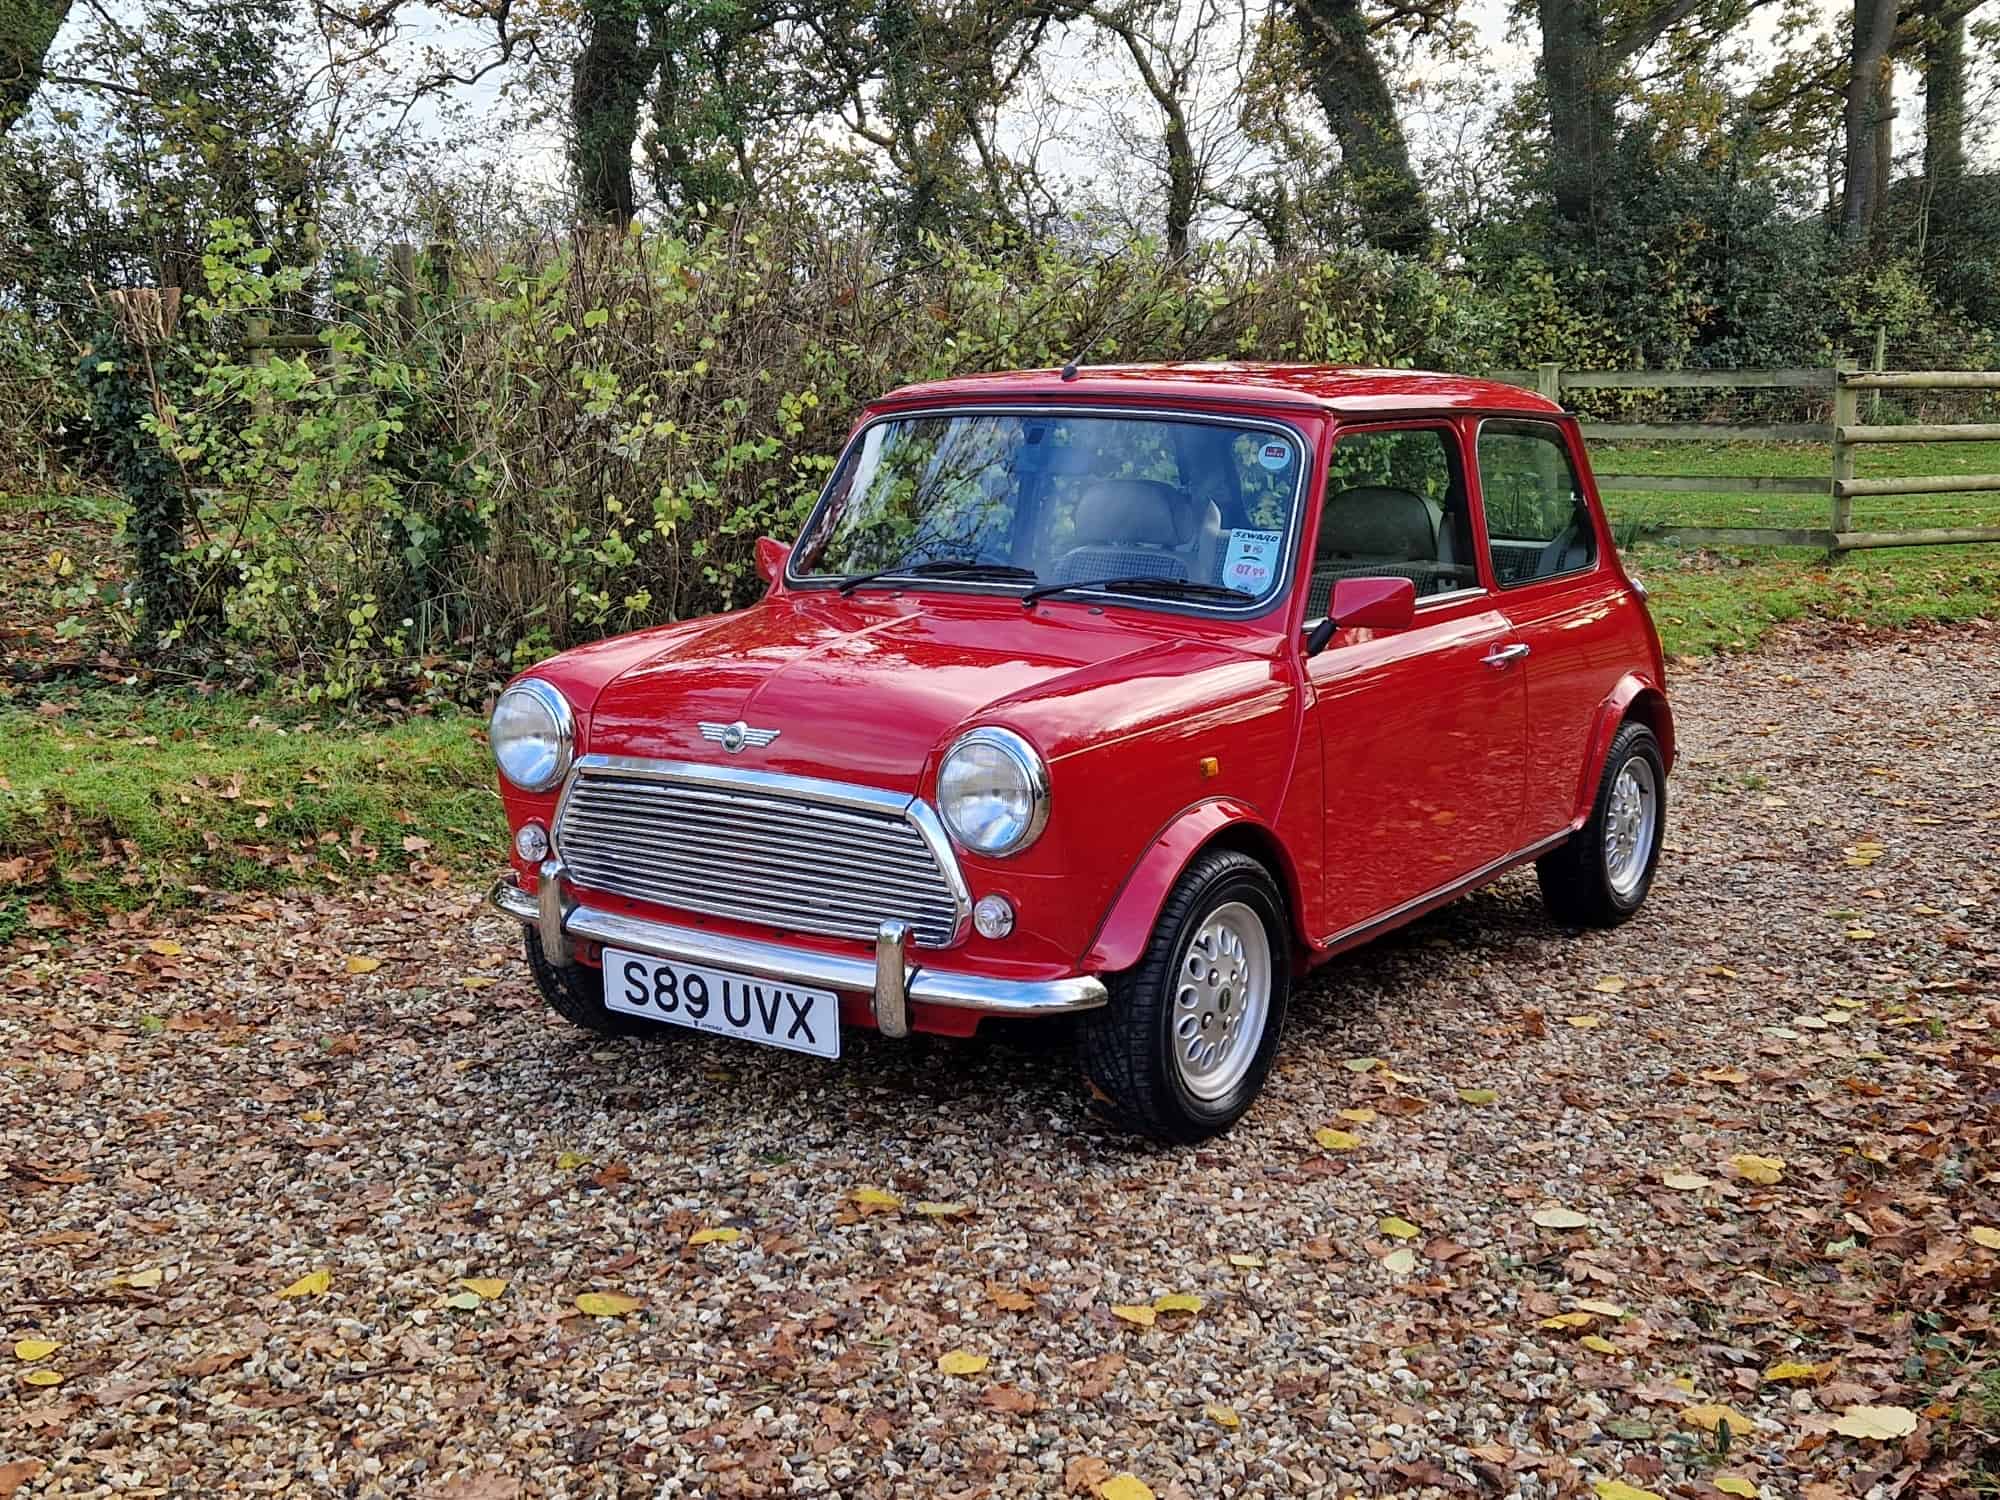 ** NOW SOLD ** 1999 Rover Mini 1.3 MPI In Classic Red With Cream Interior. Just 24200 Miles From New!